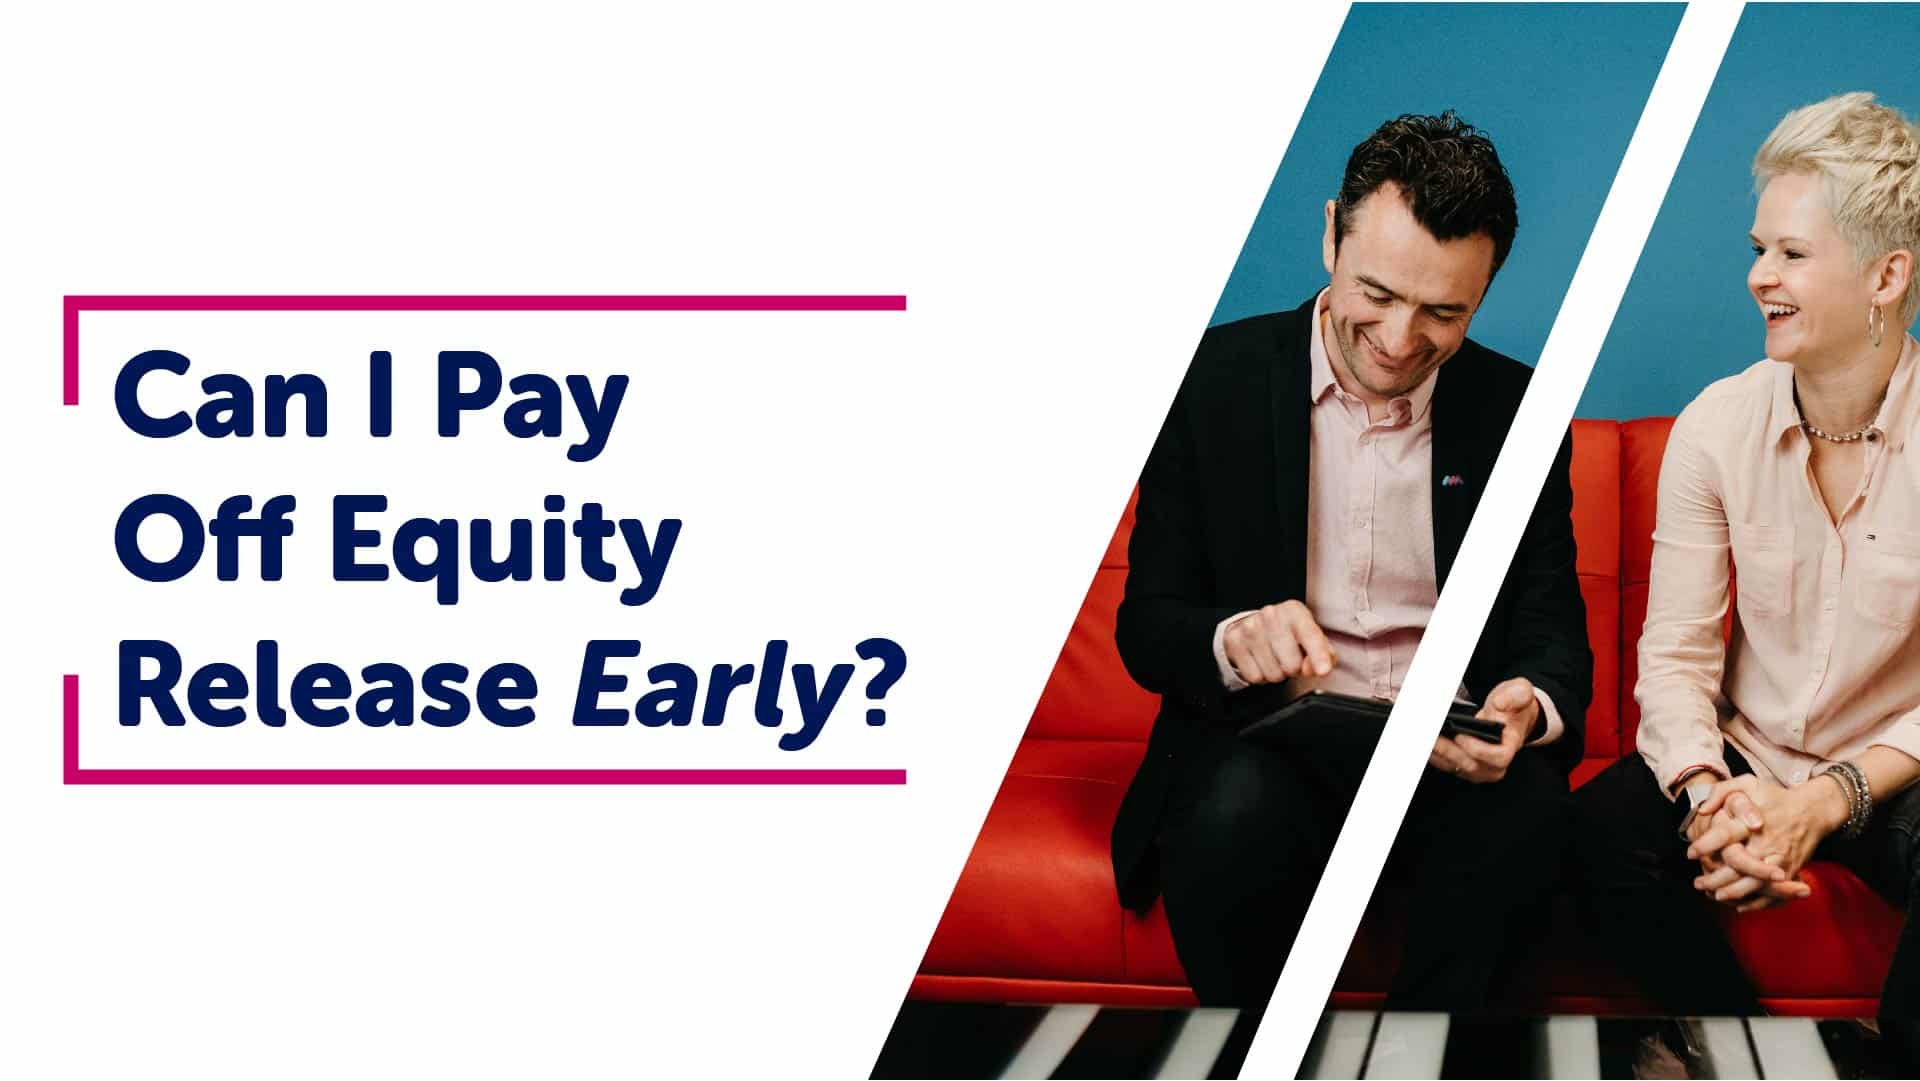 Can I Pay Off Equity Release Early